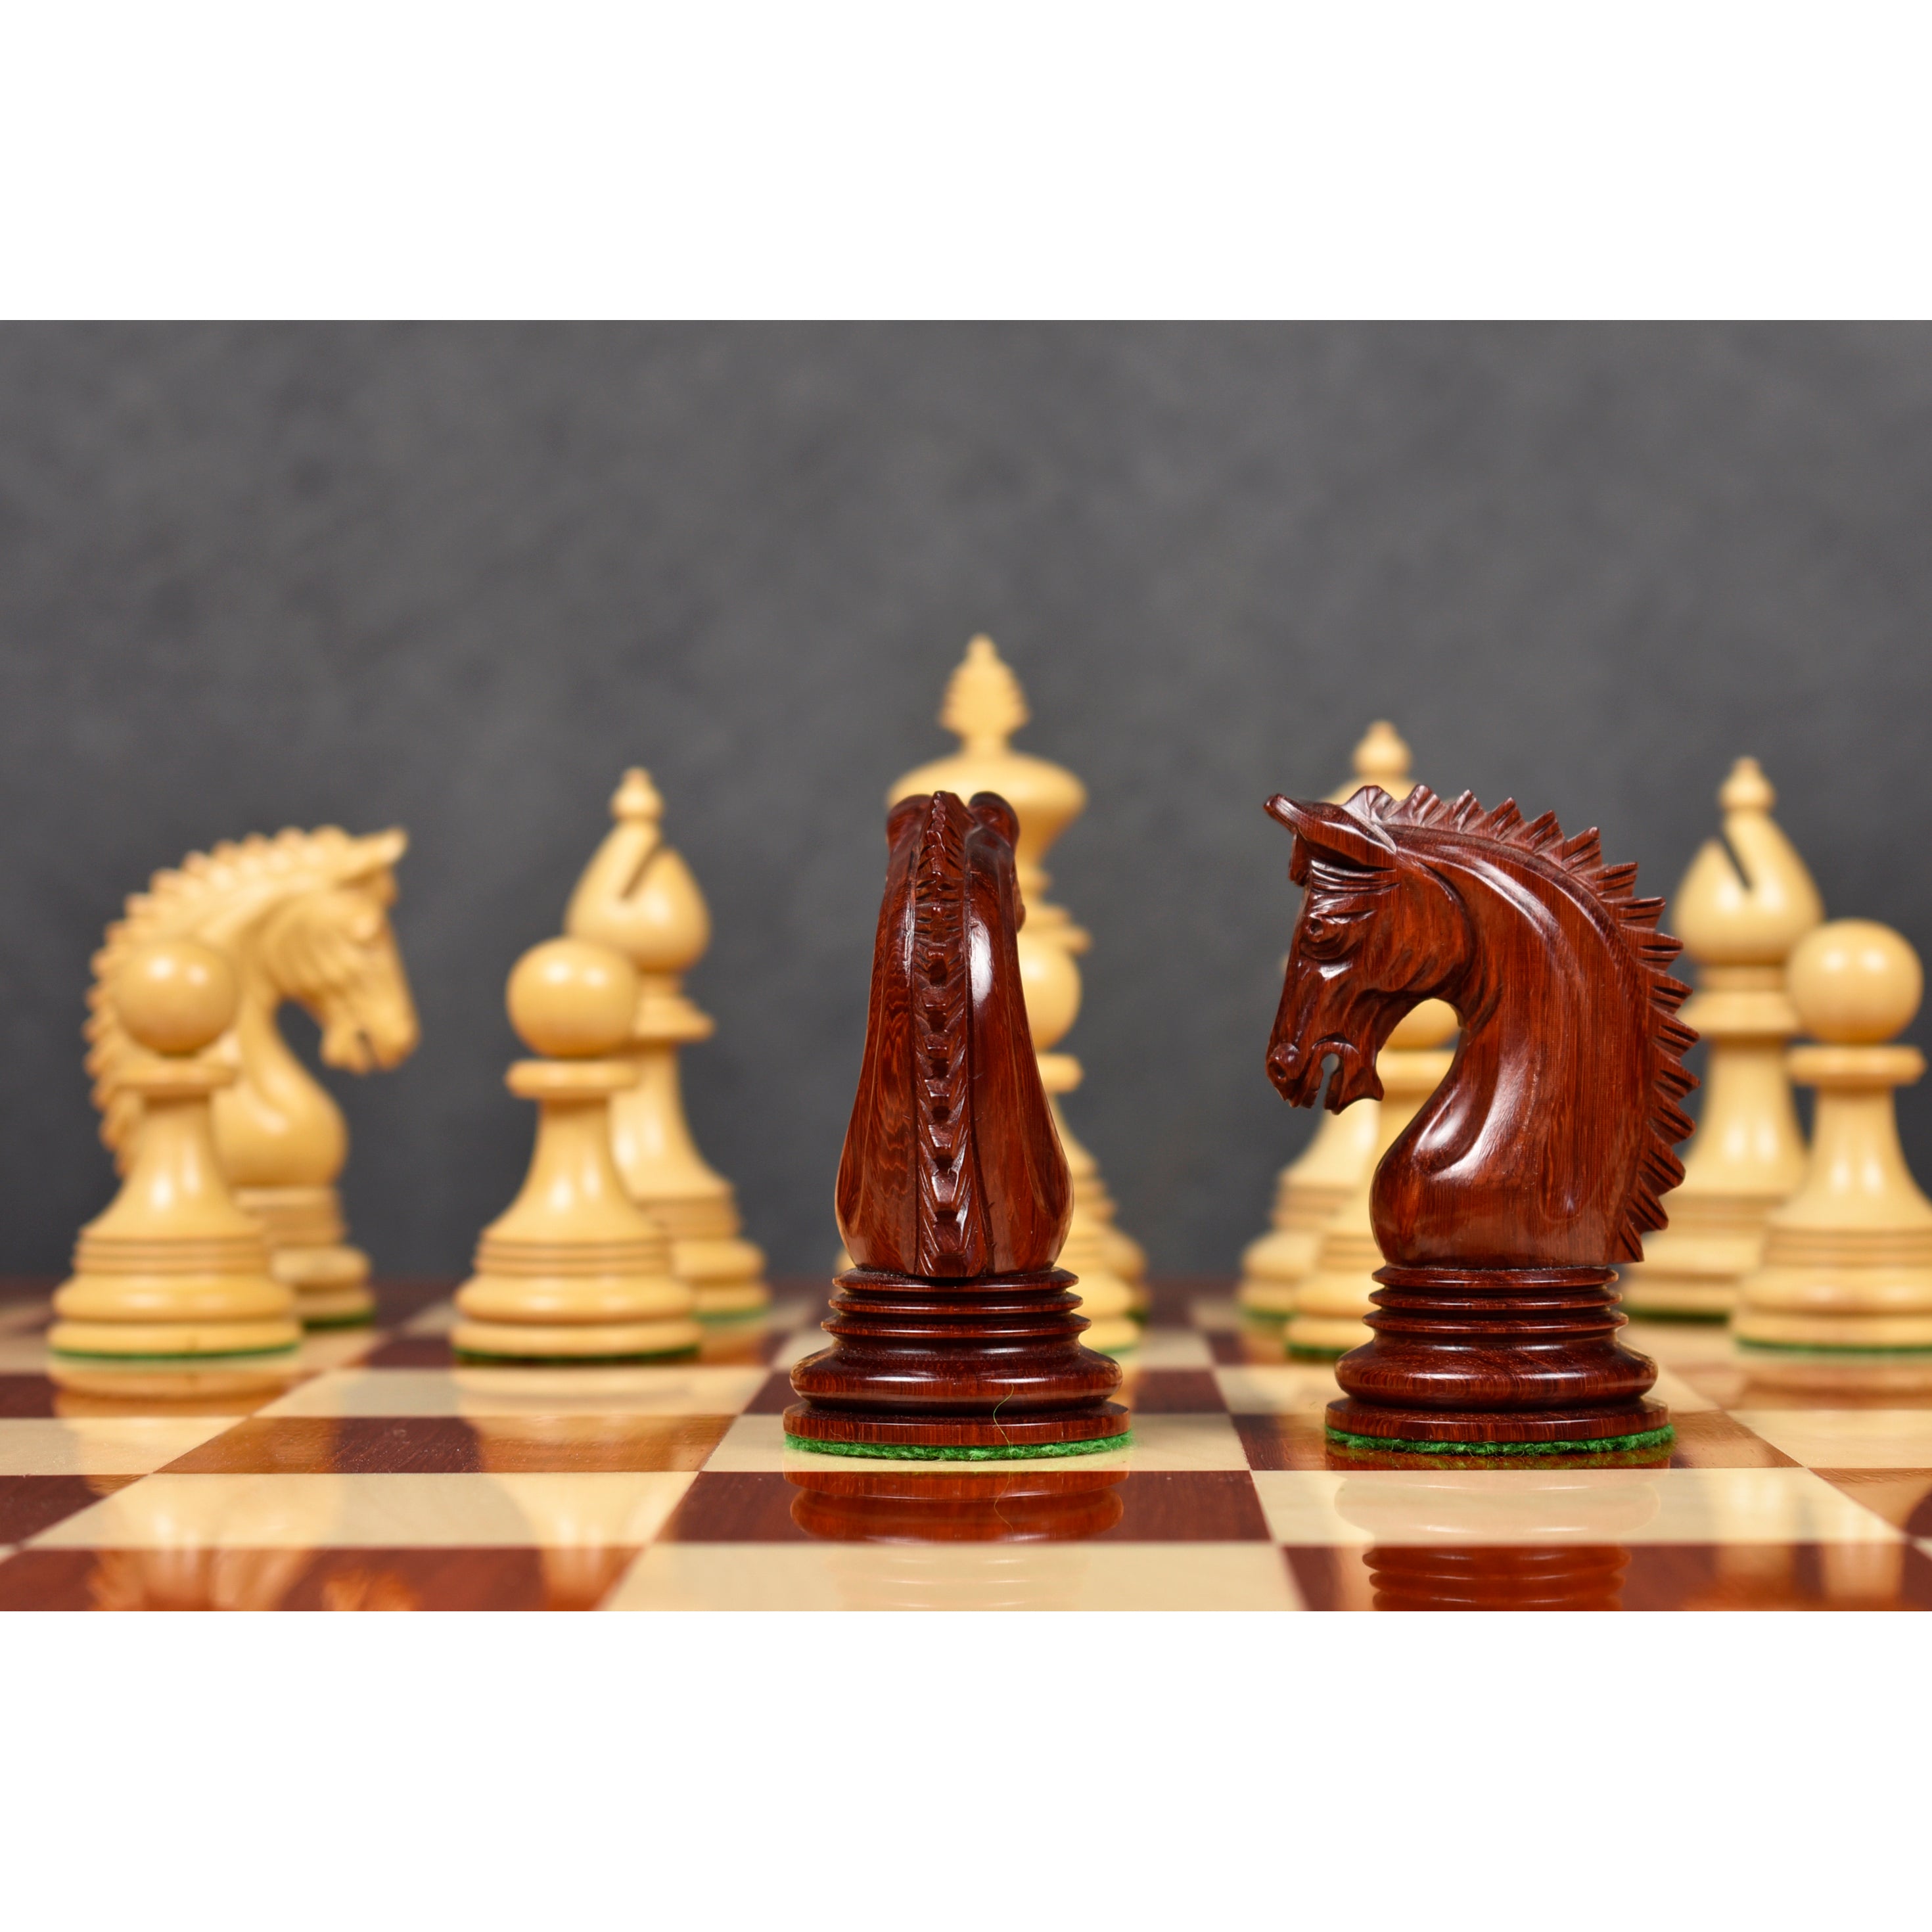 Green Metal Chess Set With Roman Empire Chess Pieces 13 Inch